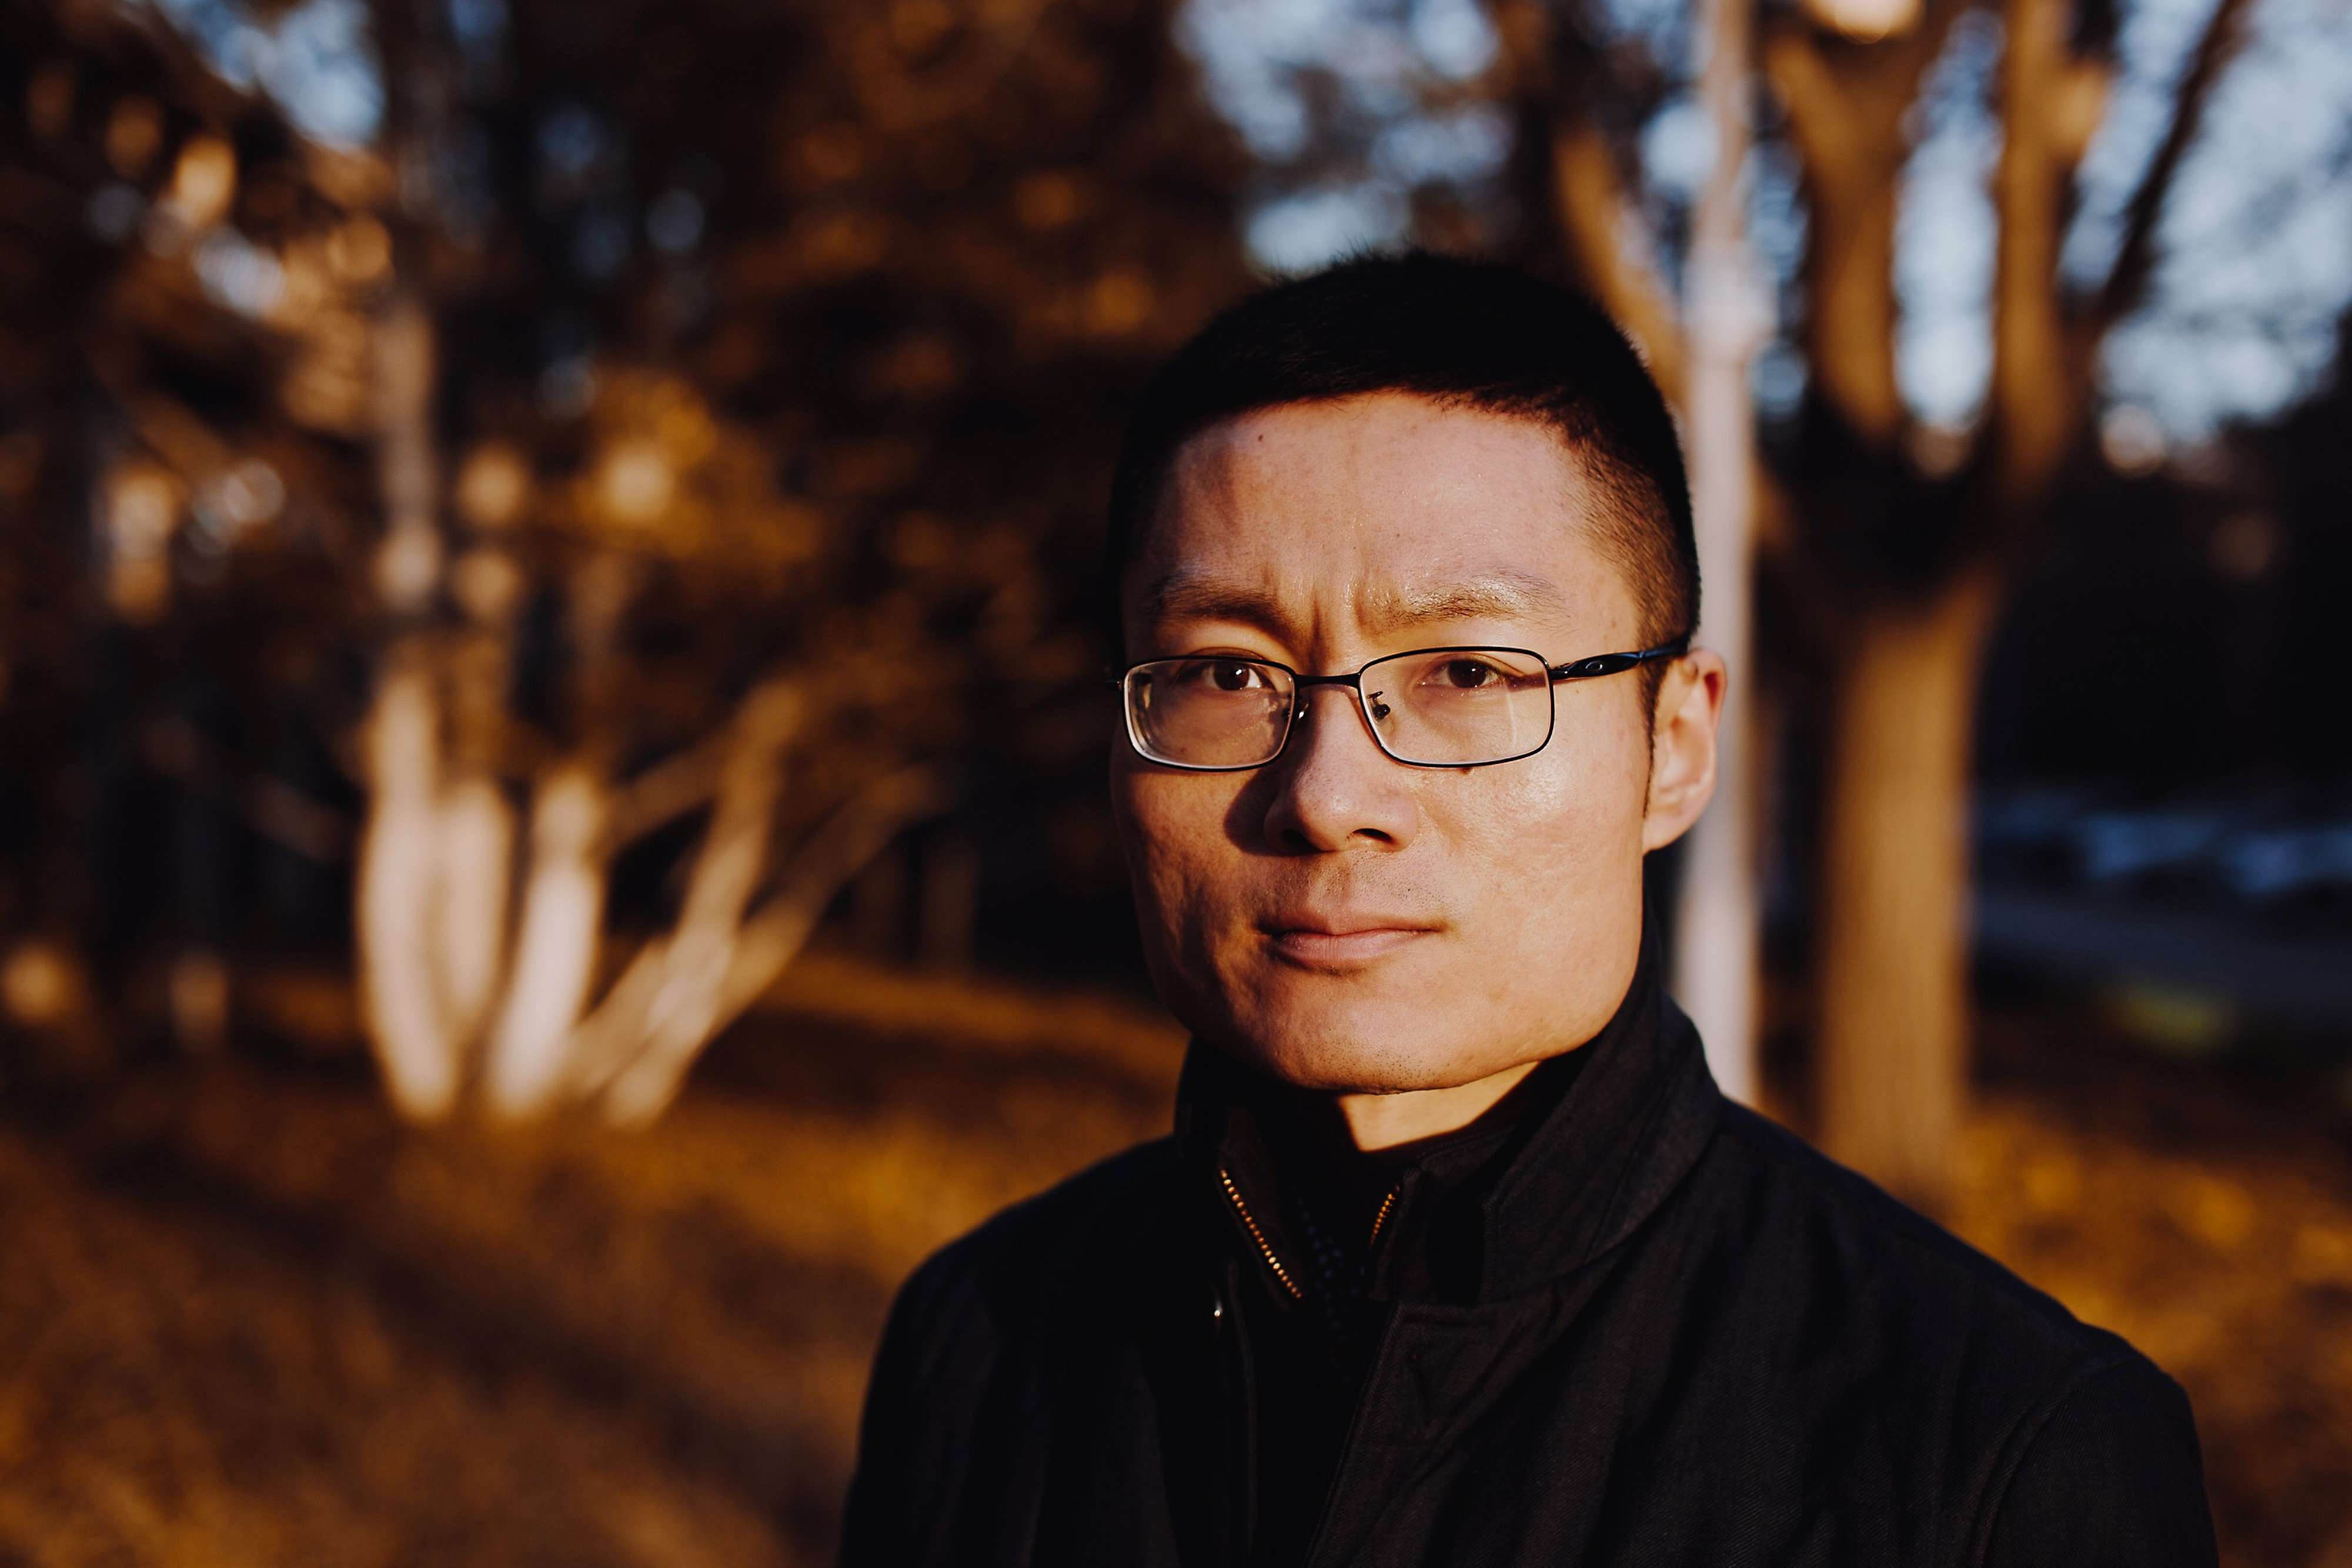 Ma Tianjie worked for Greenpeace for several years before moving to China Dialogue. Photo: Luke Pegrum